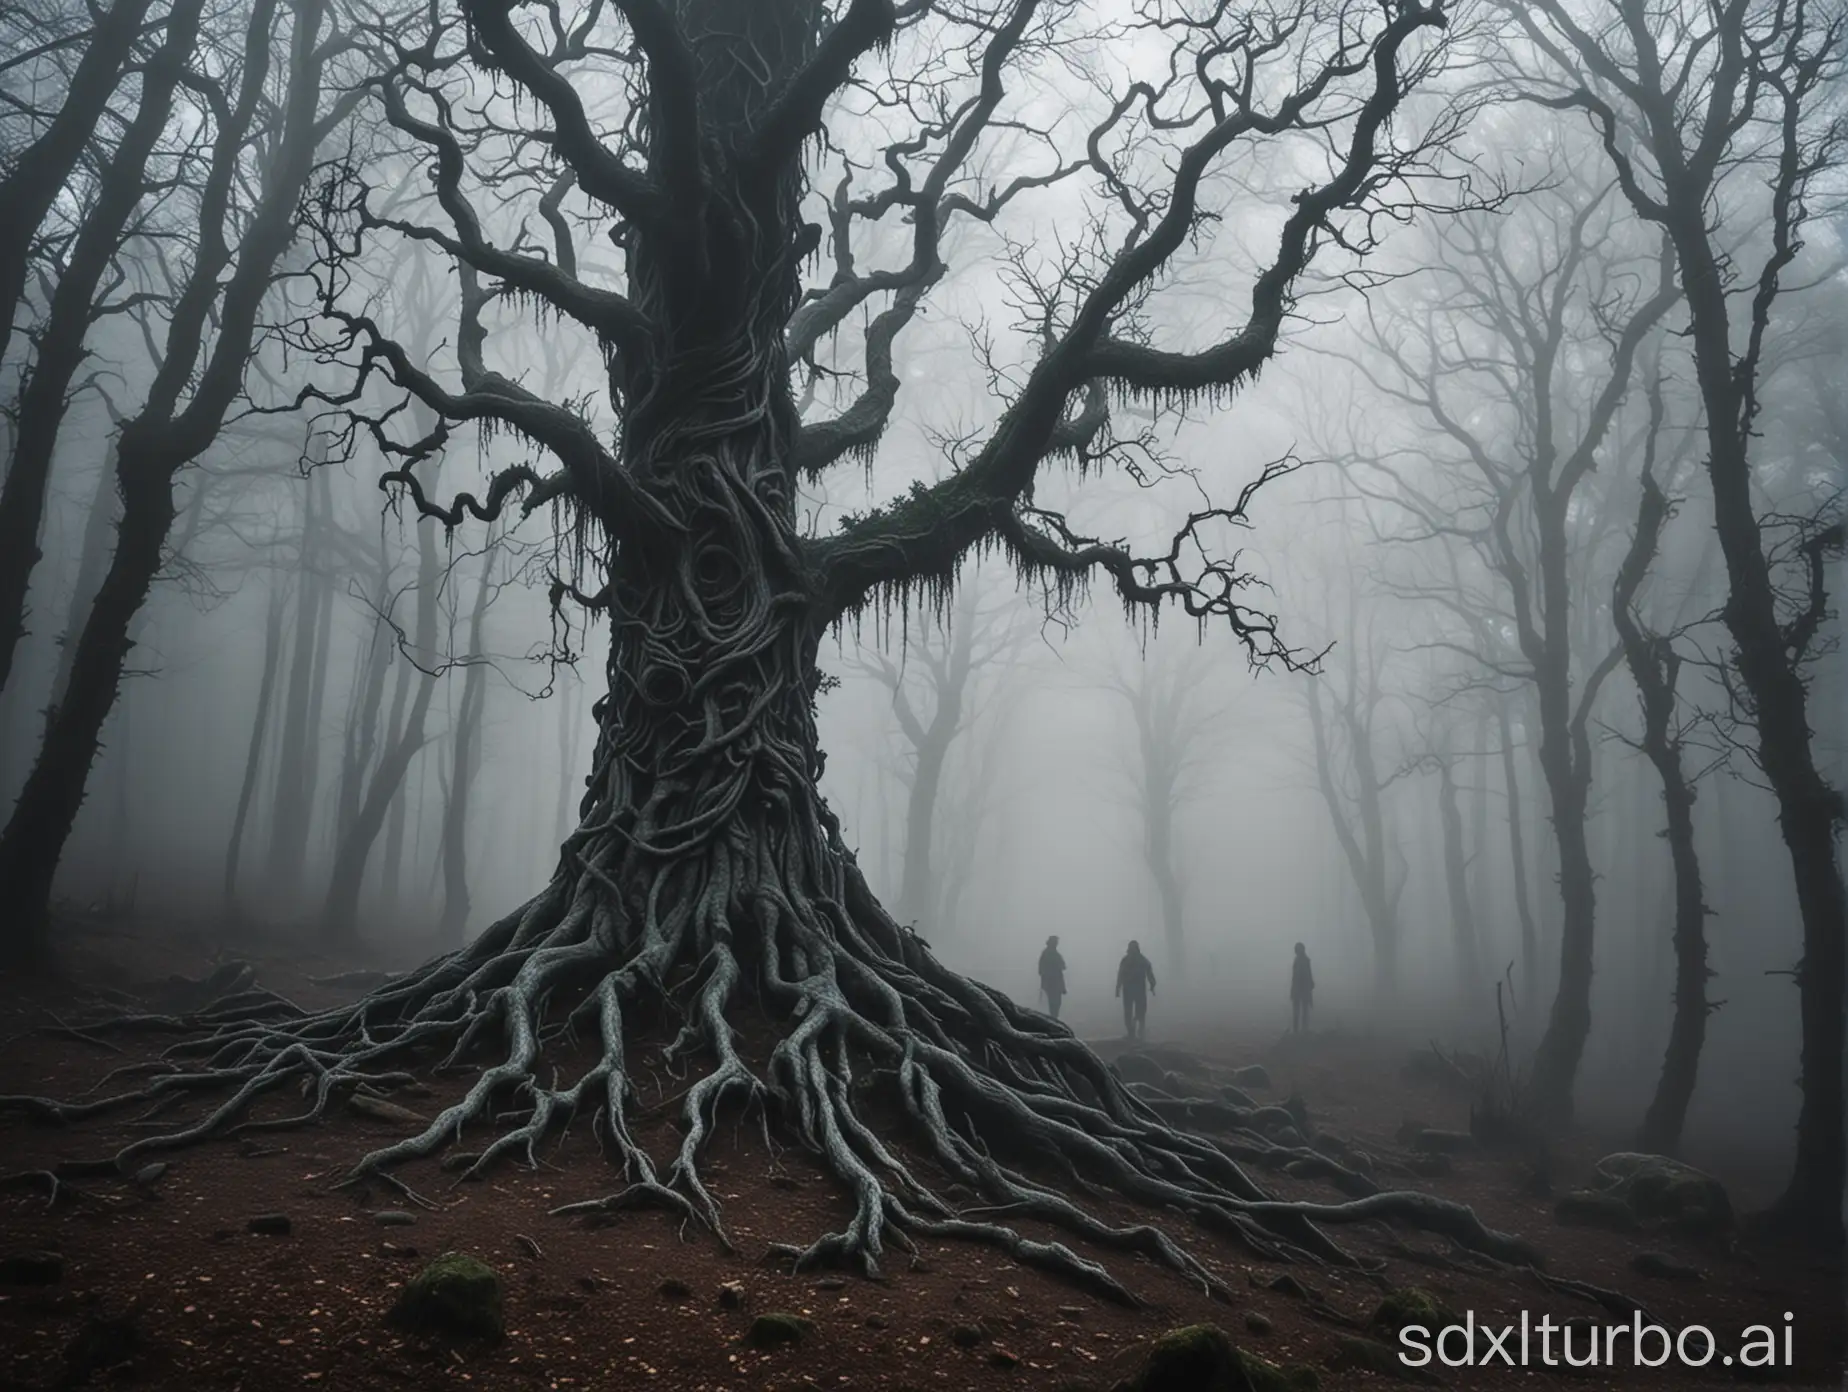 twisted scary looking tree-people growing in a dark forest, mist, tree-zombies, trees